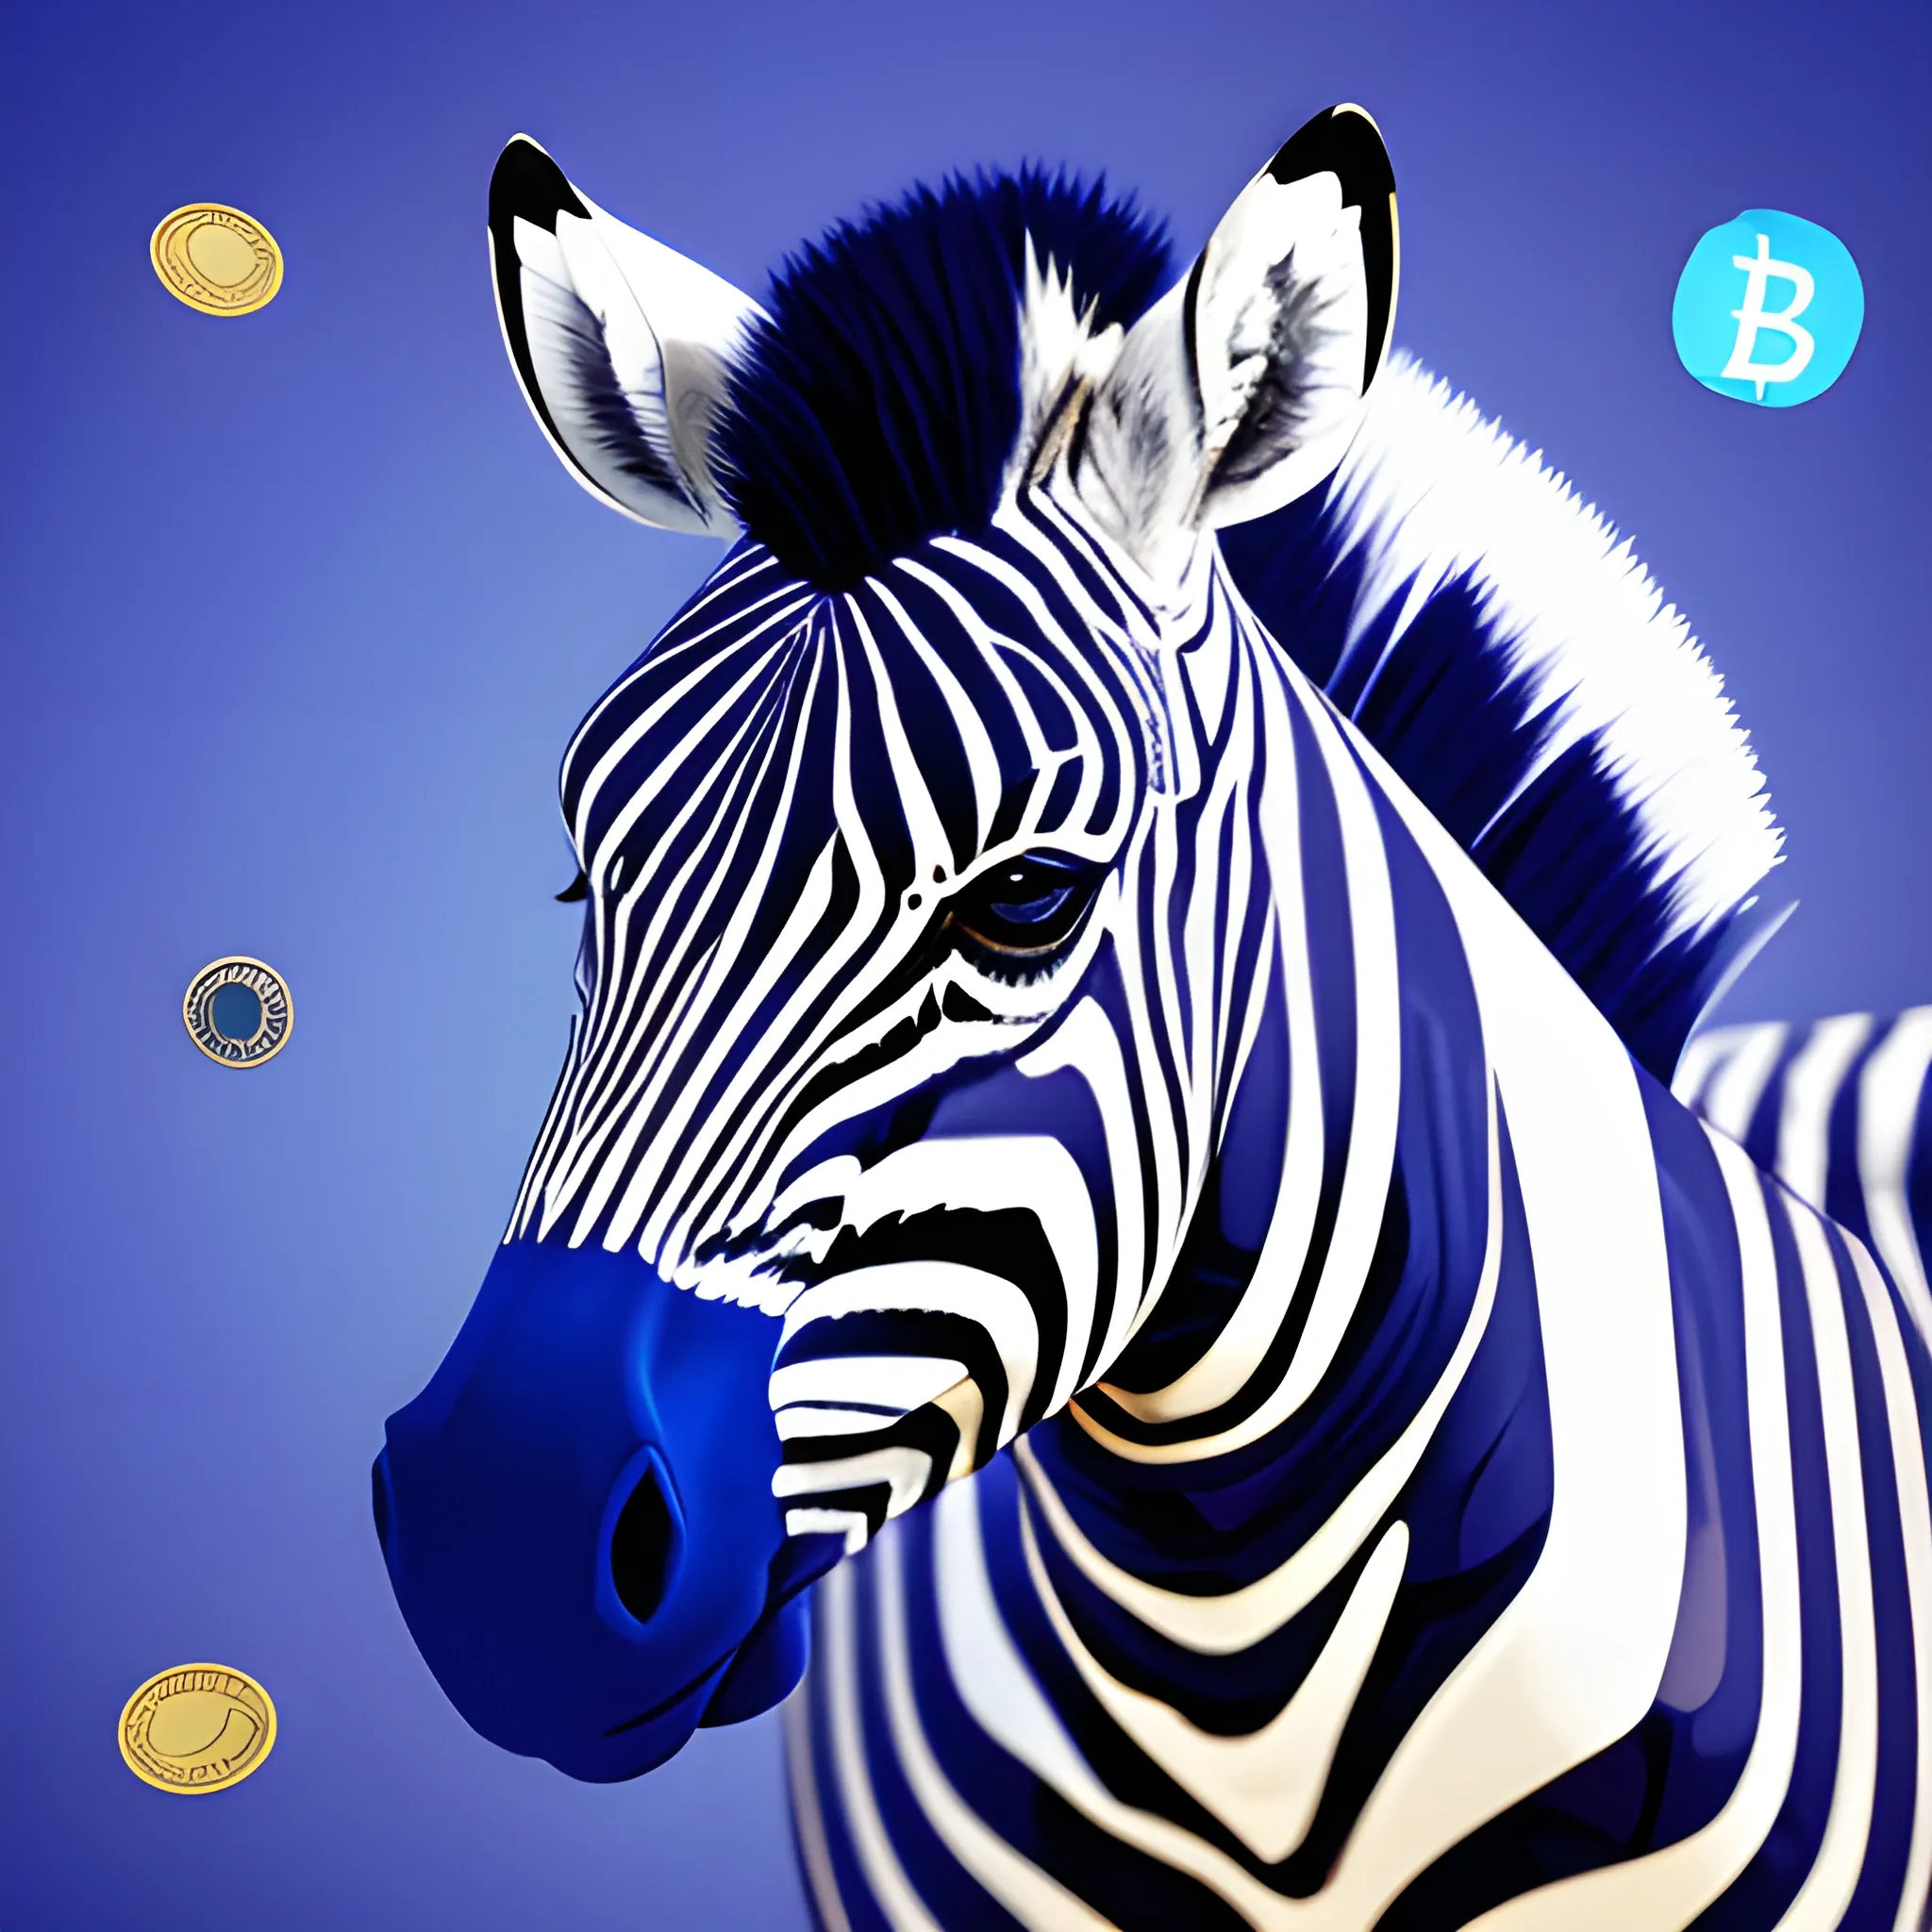 Zebra on the background of the planet Earth in blue colors on the theme of cryptocurrency, quality 128k, 3D